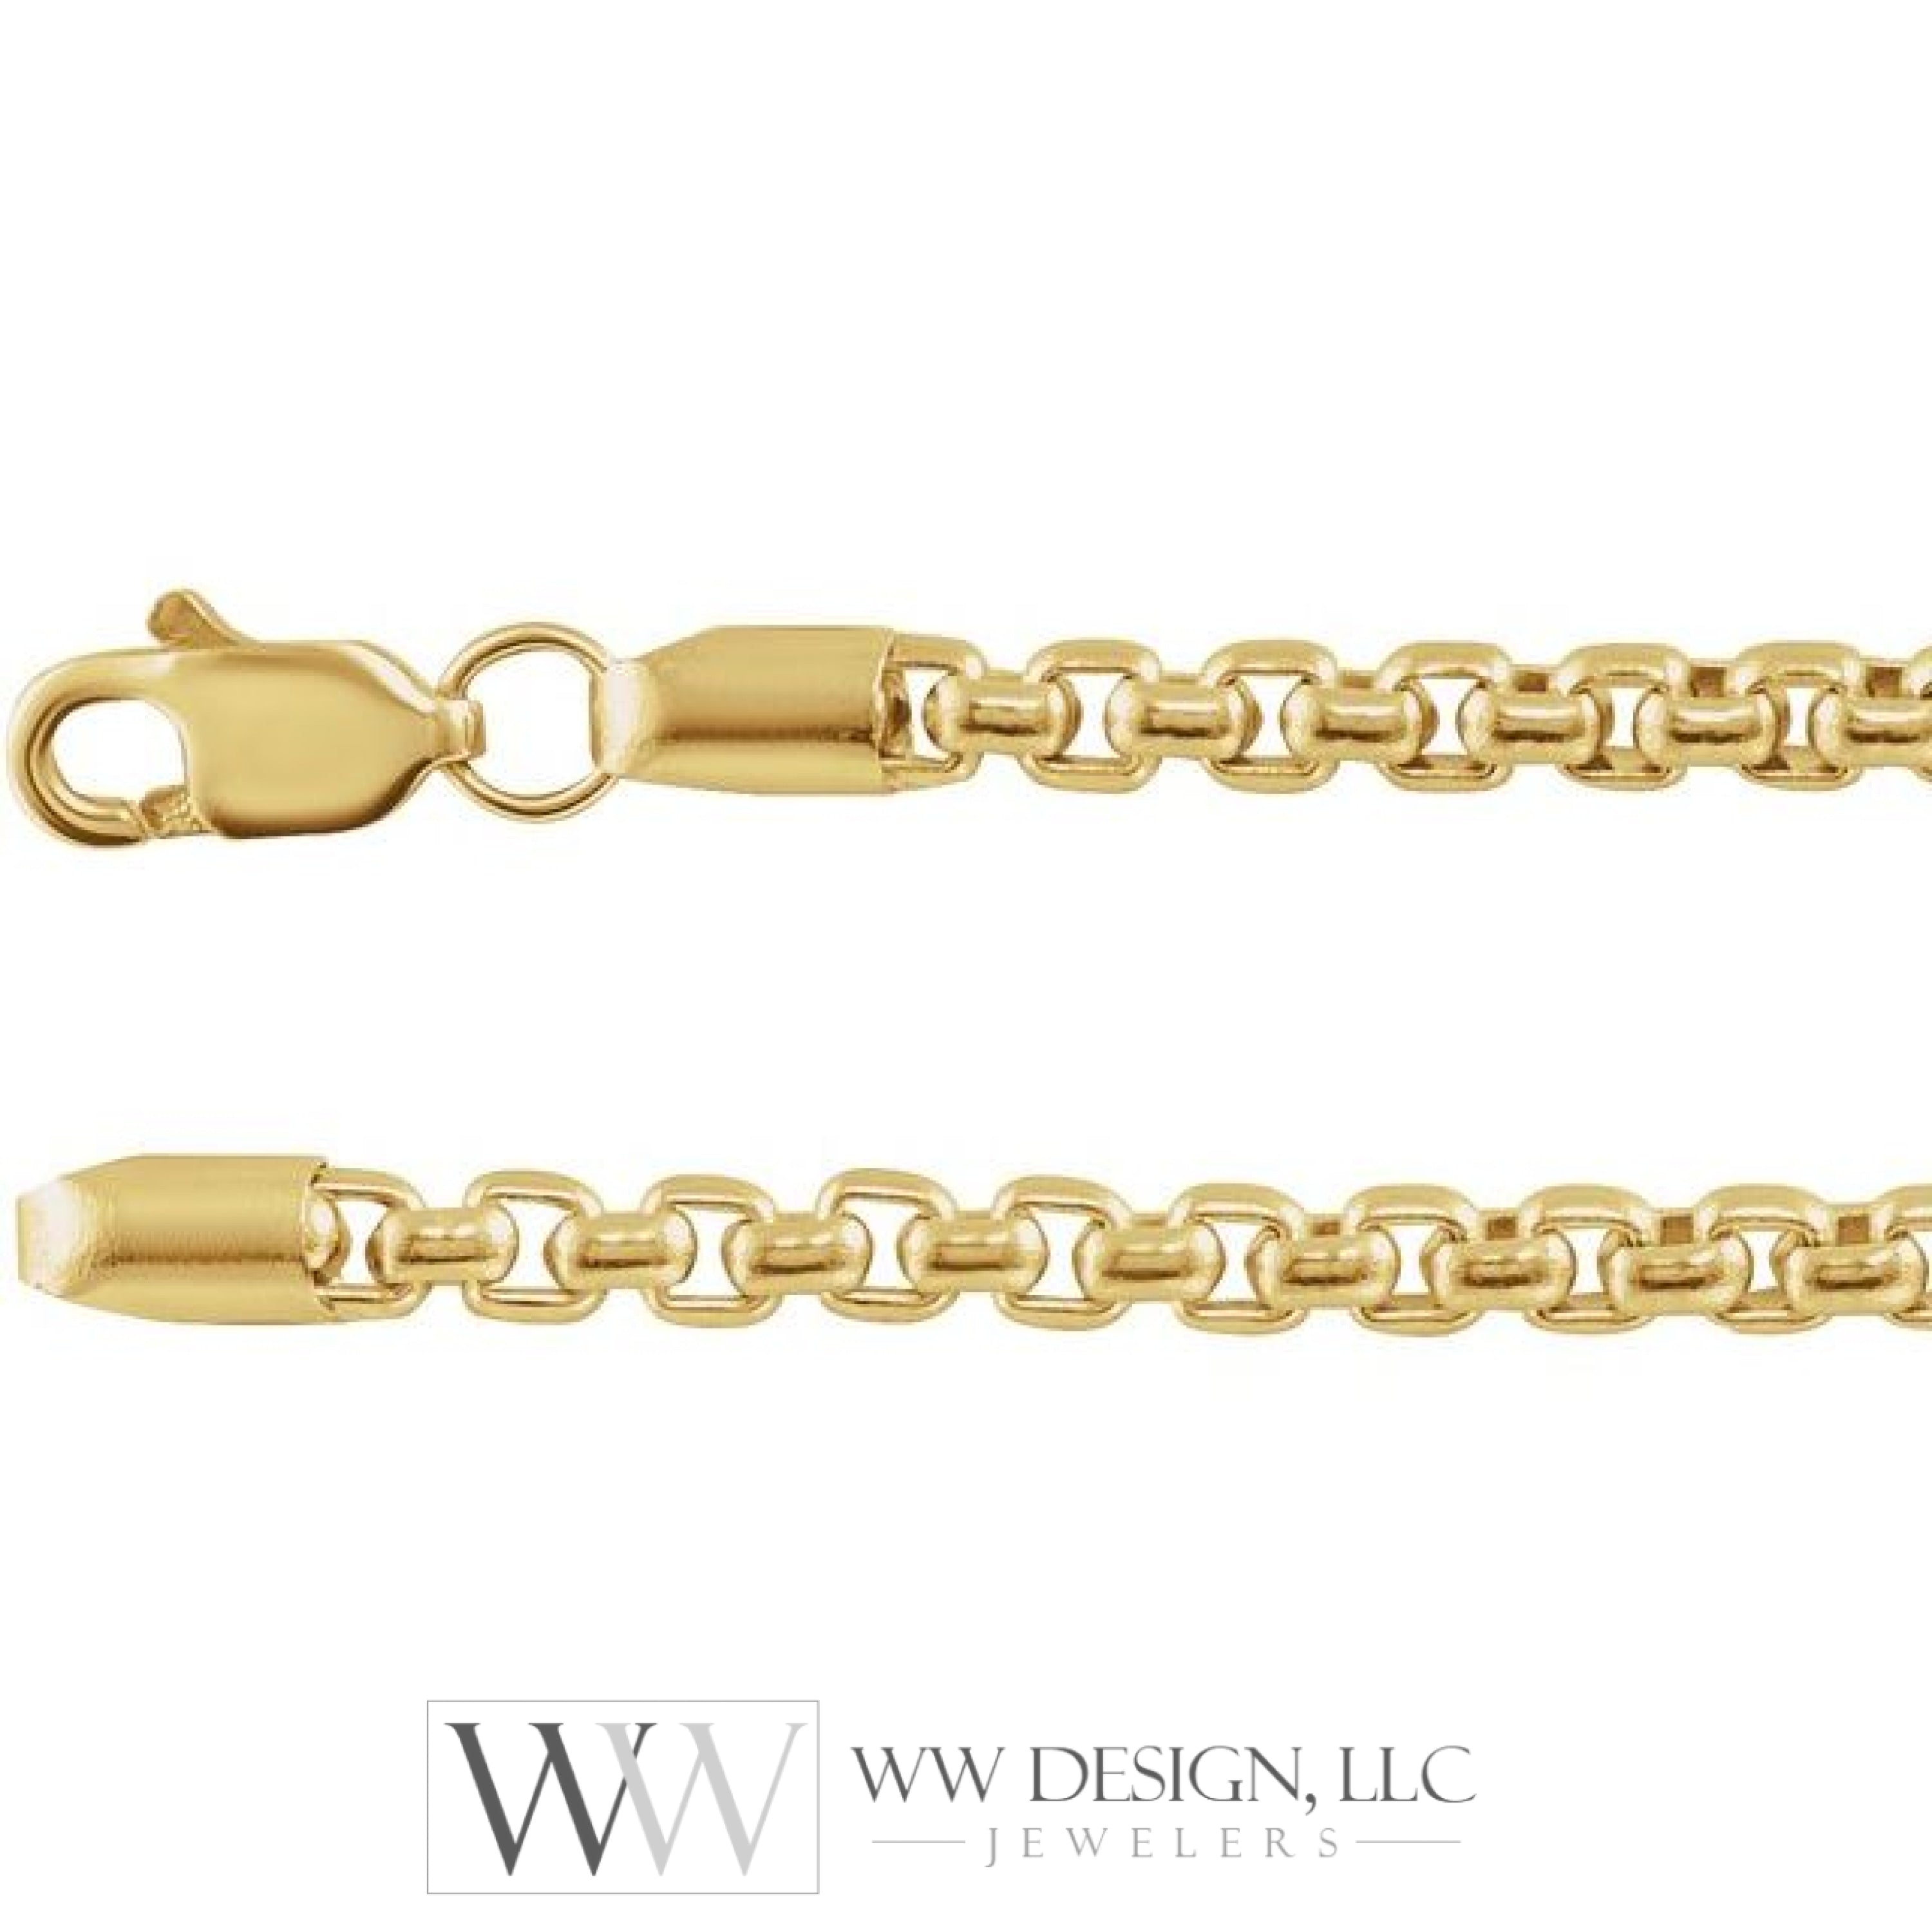 2.6mm Rounded Box Chain Bracelet or Necklace - 14k Gold (Y, W, R), or Sterling Silver